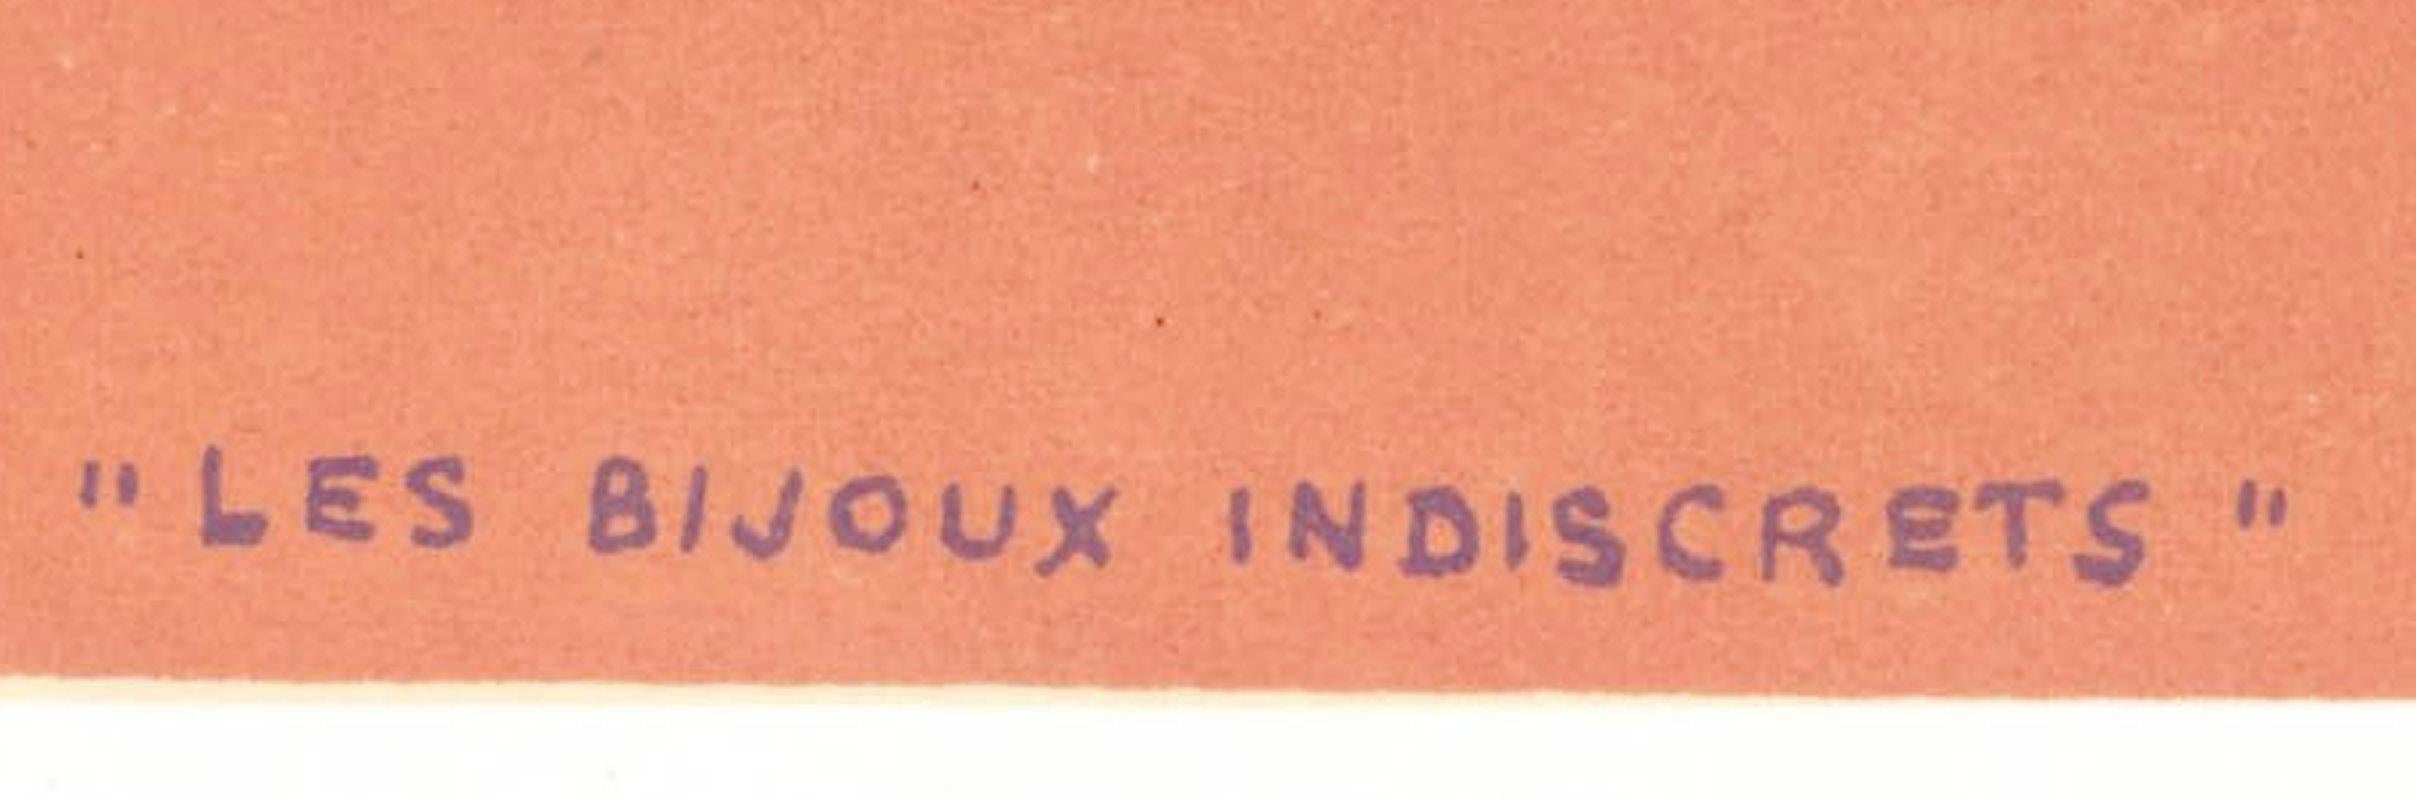 Les Bijoux Indiscrets
(The Indiscreet Jewels)
Color lithograph, 1962-3
As published in XXeme Siecle, 1963
From the edition issued by San Lazarro unsigned for the album XXeme Siècle No.22. Printed from the same stones and at the same date as the